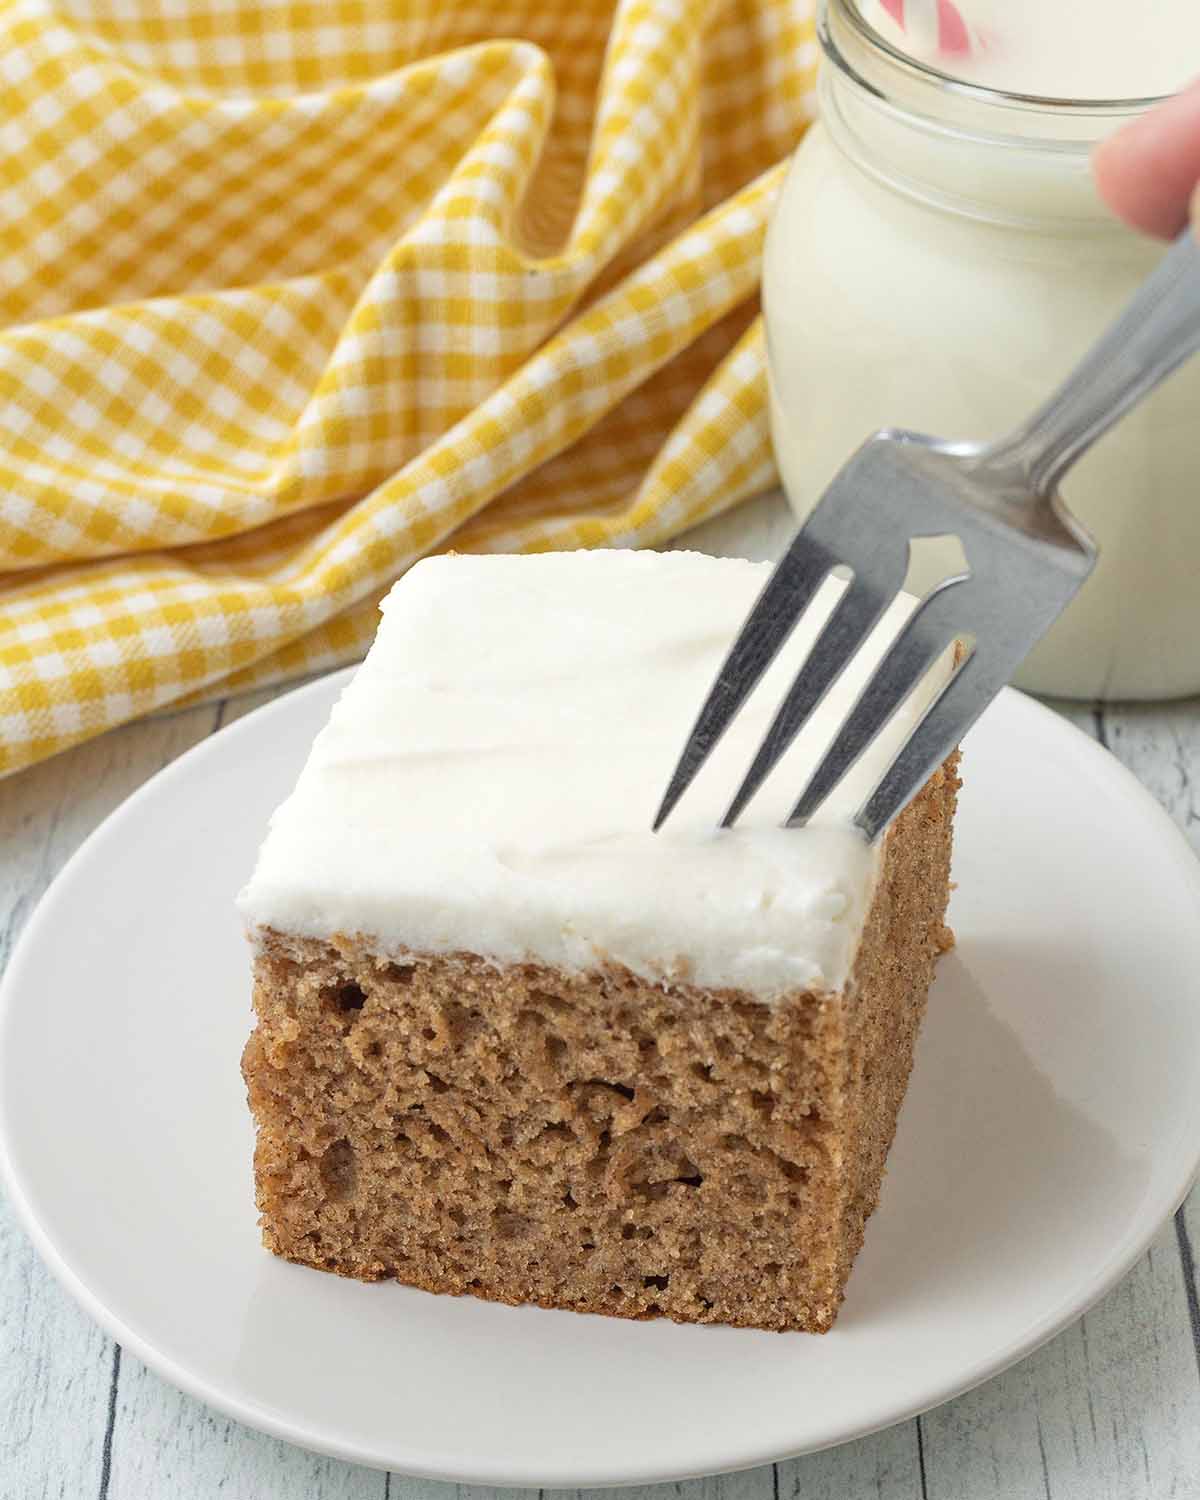 A hand holding a fork that is digging into a square of frosted vegan banana cake.